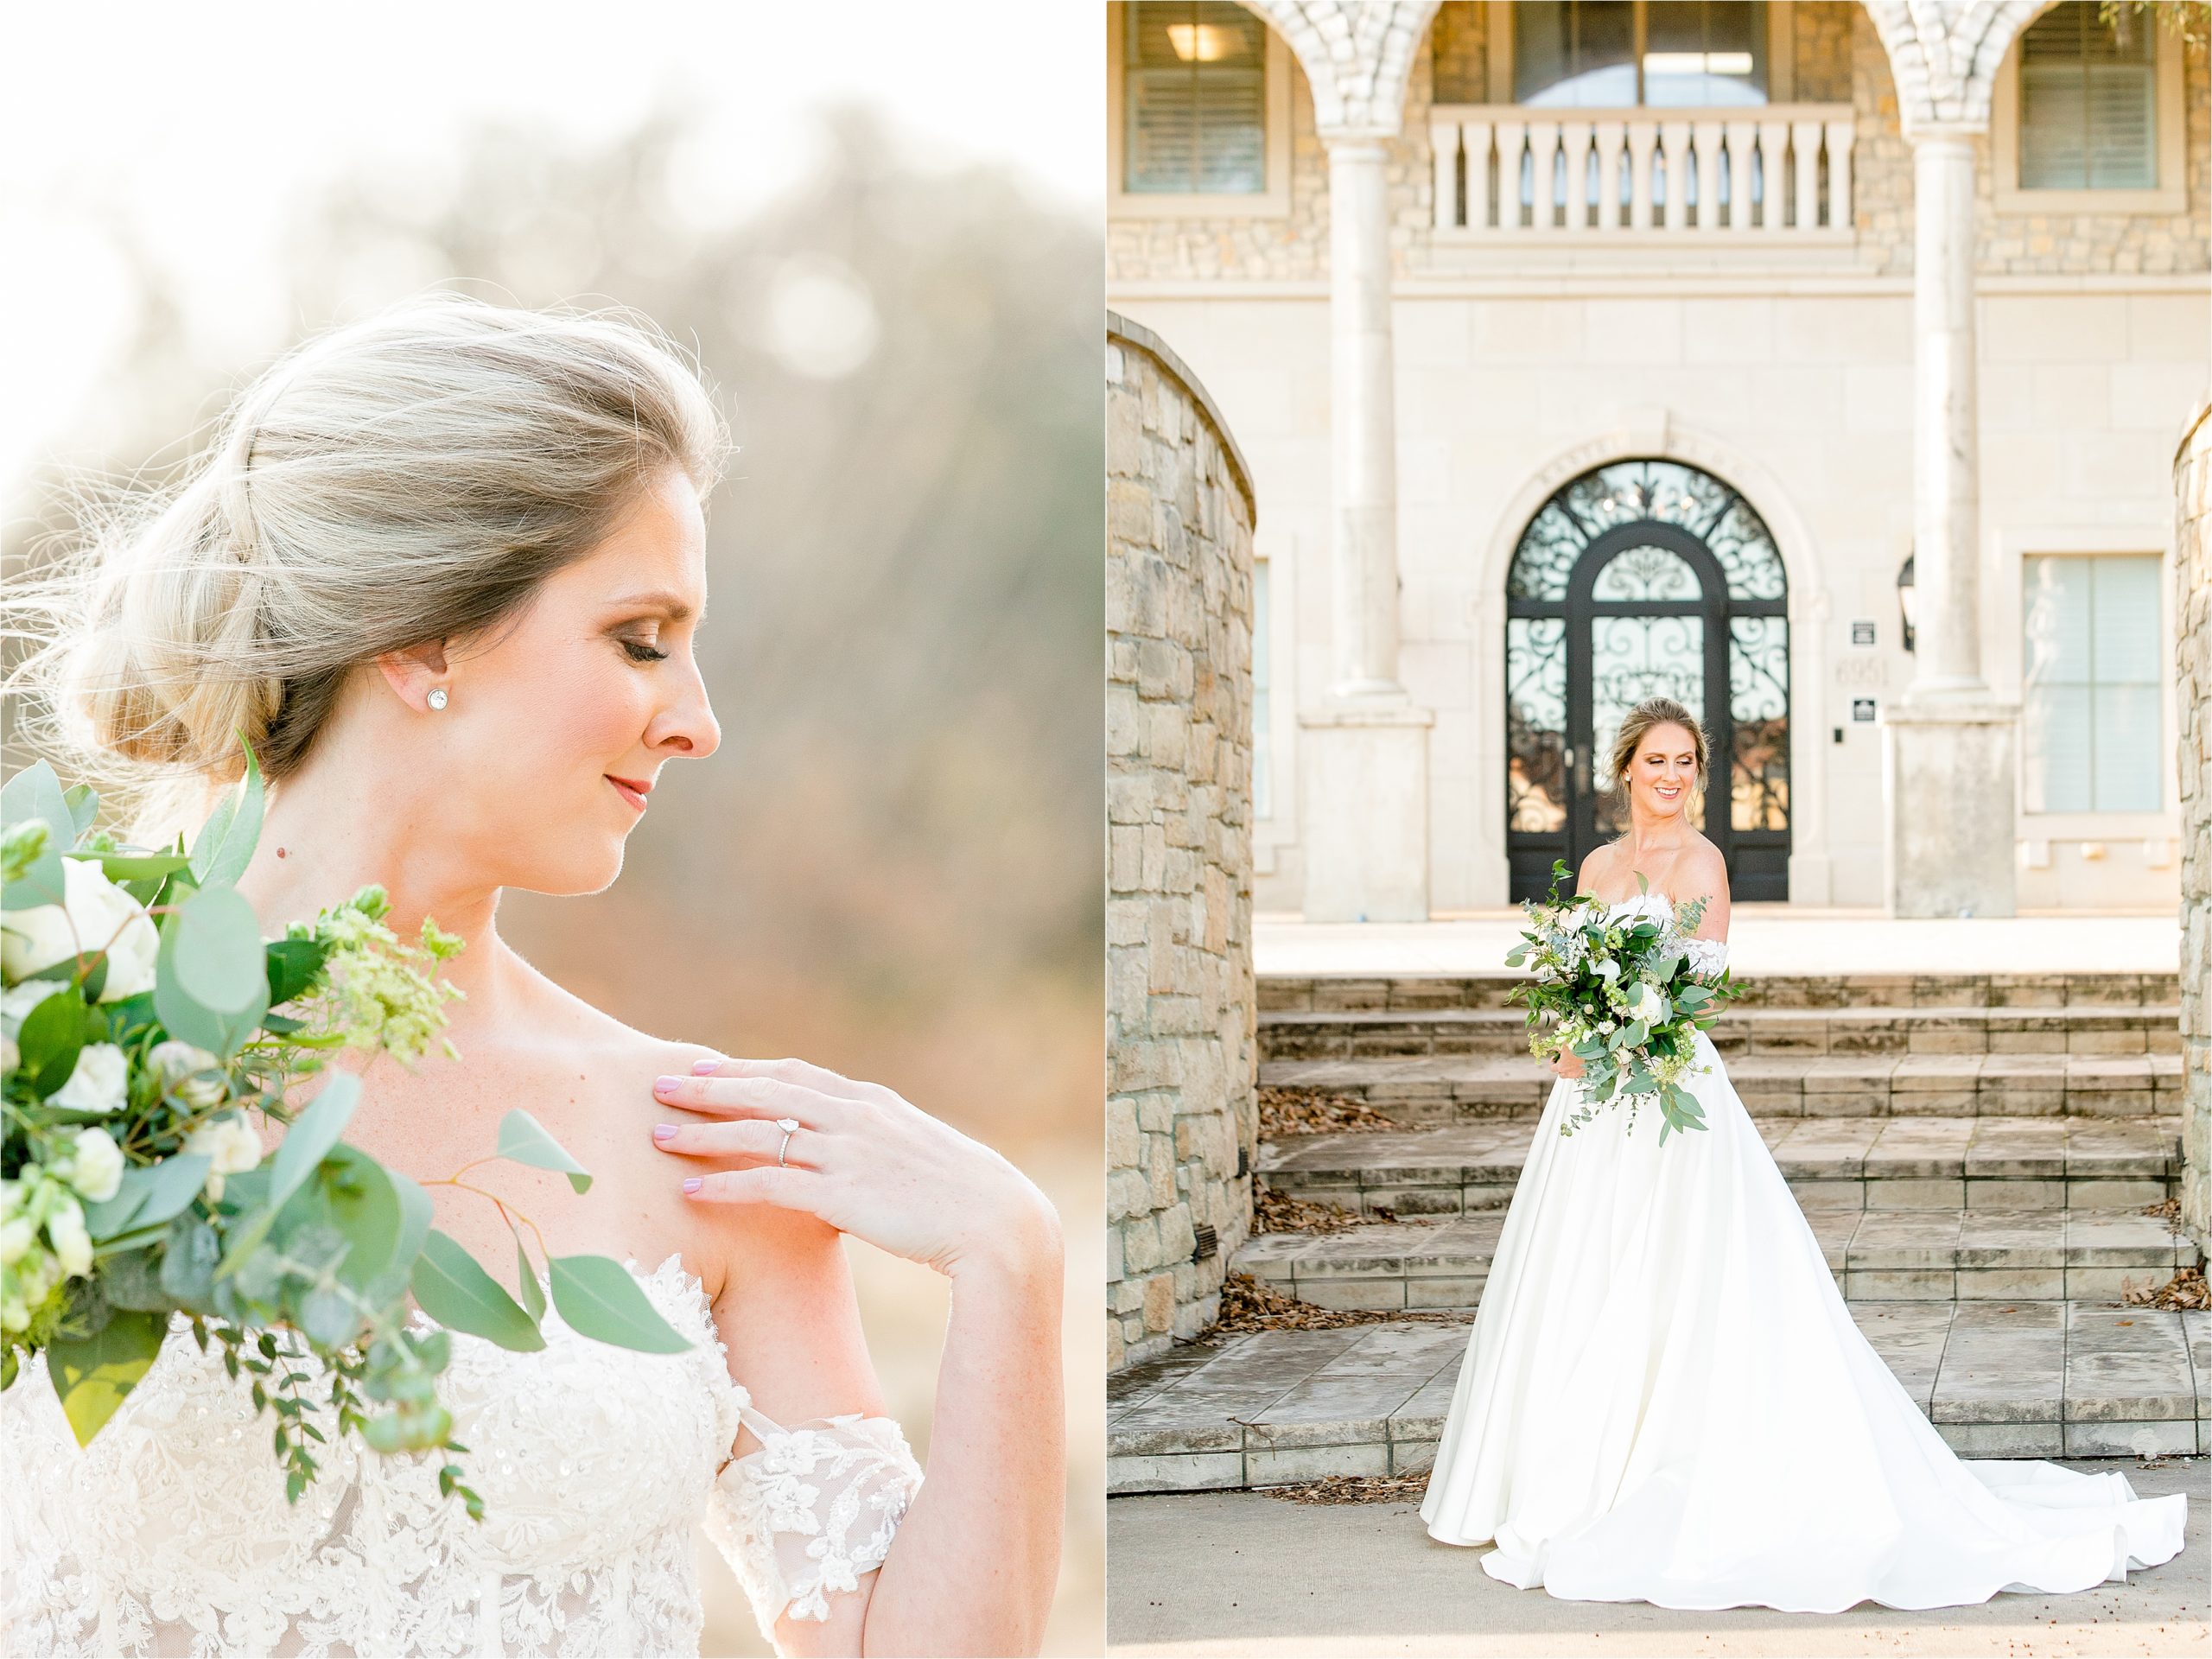 A bride looks down and relaxes her hand on her shoulder to show off her engagement ring and greenery filled bouquet in front of stone building at adriatica village 